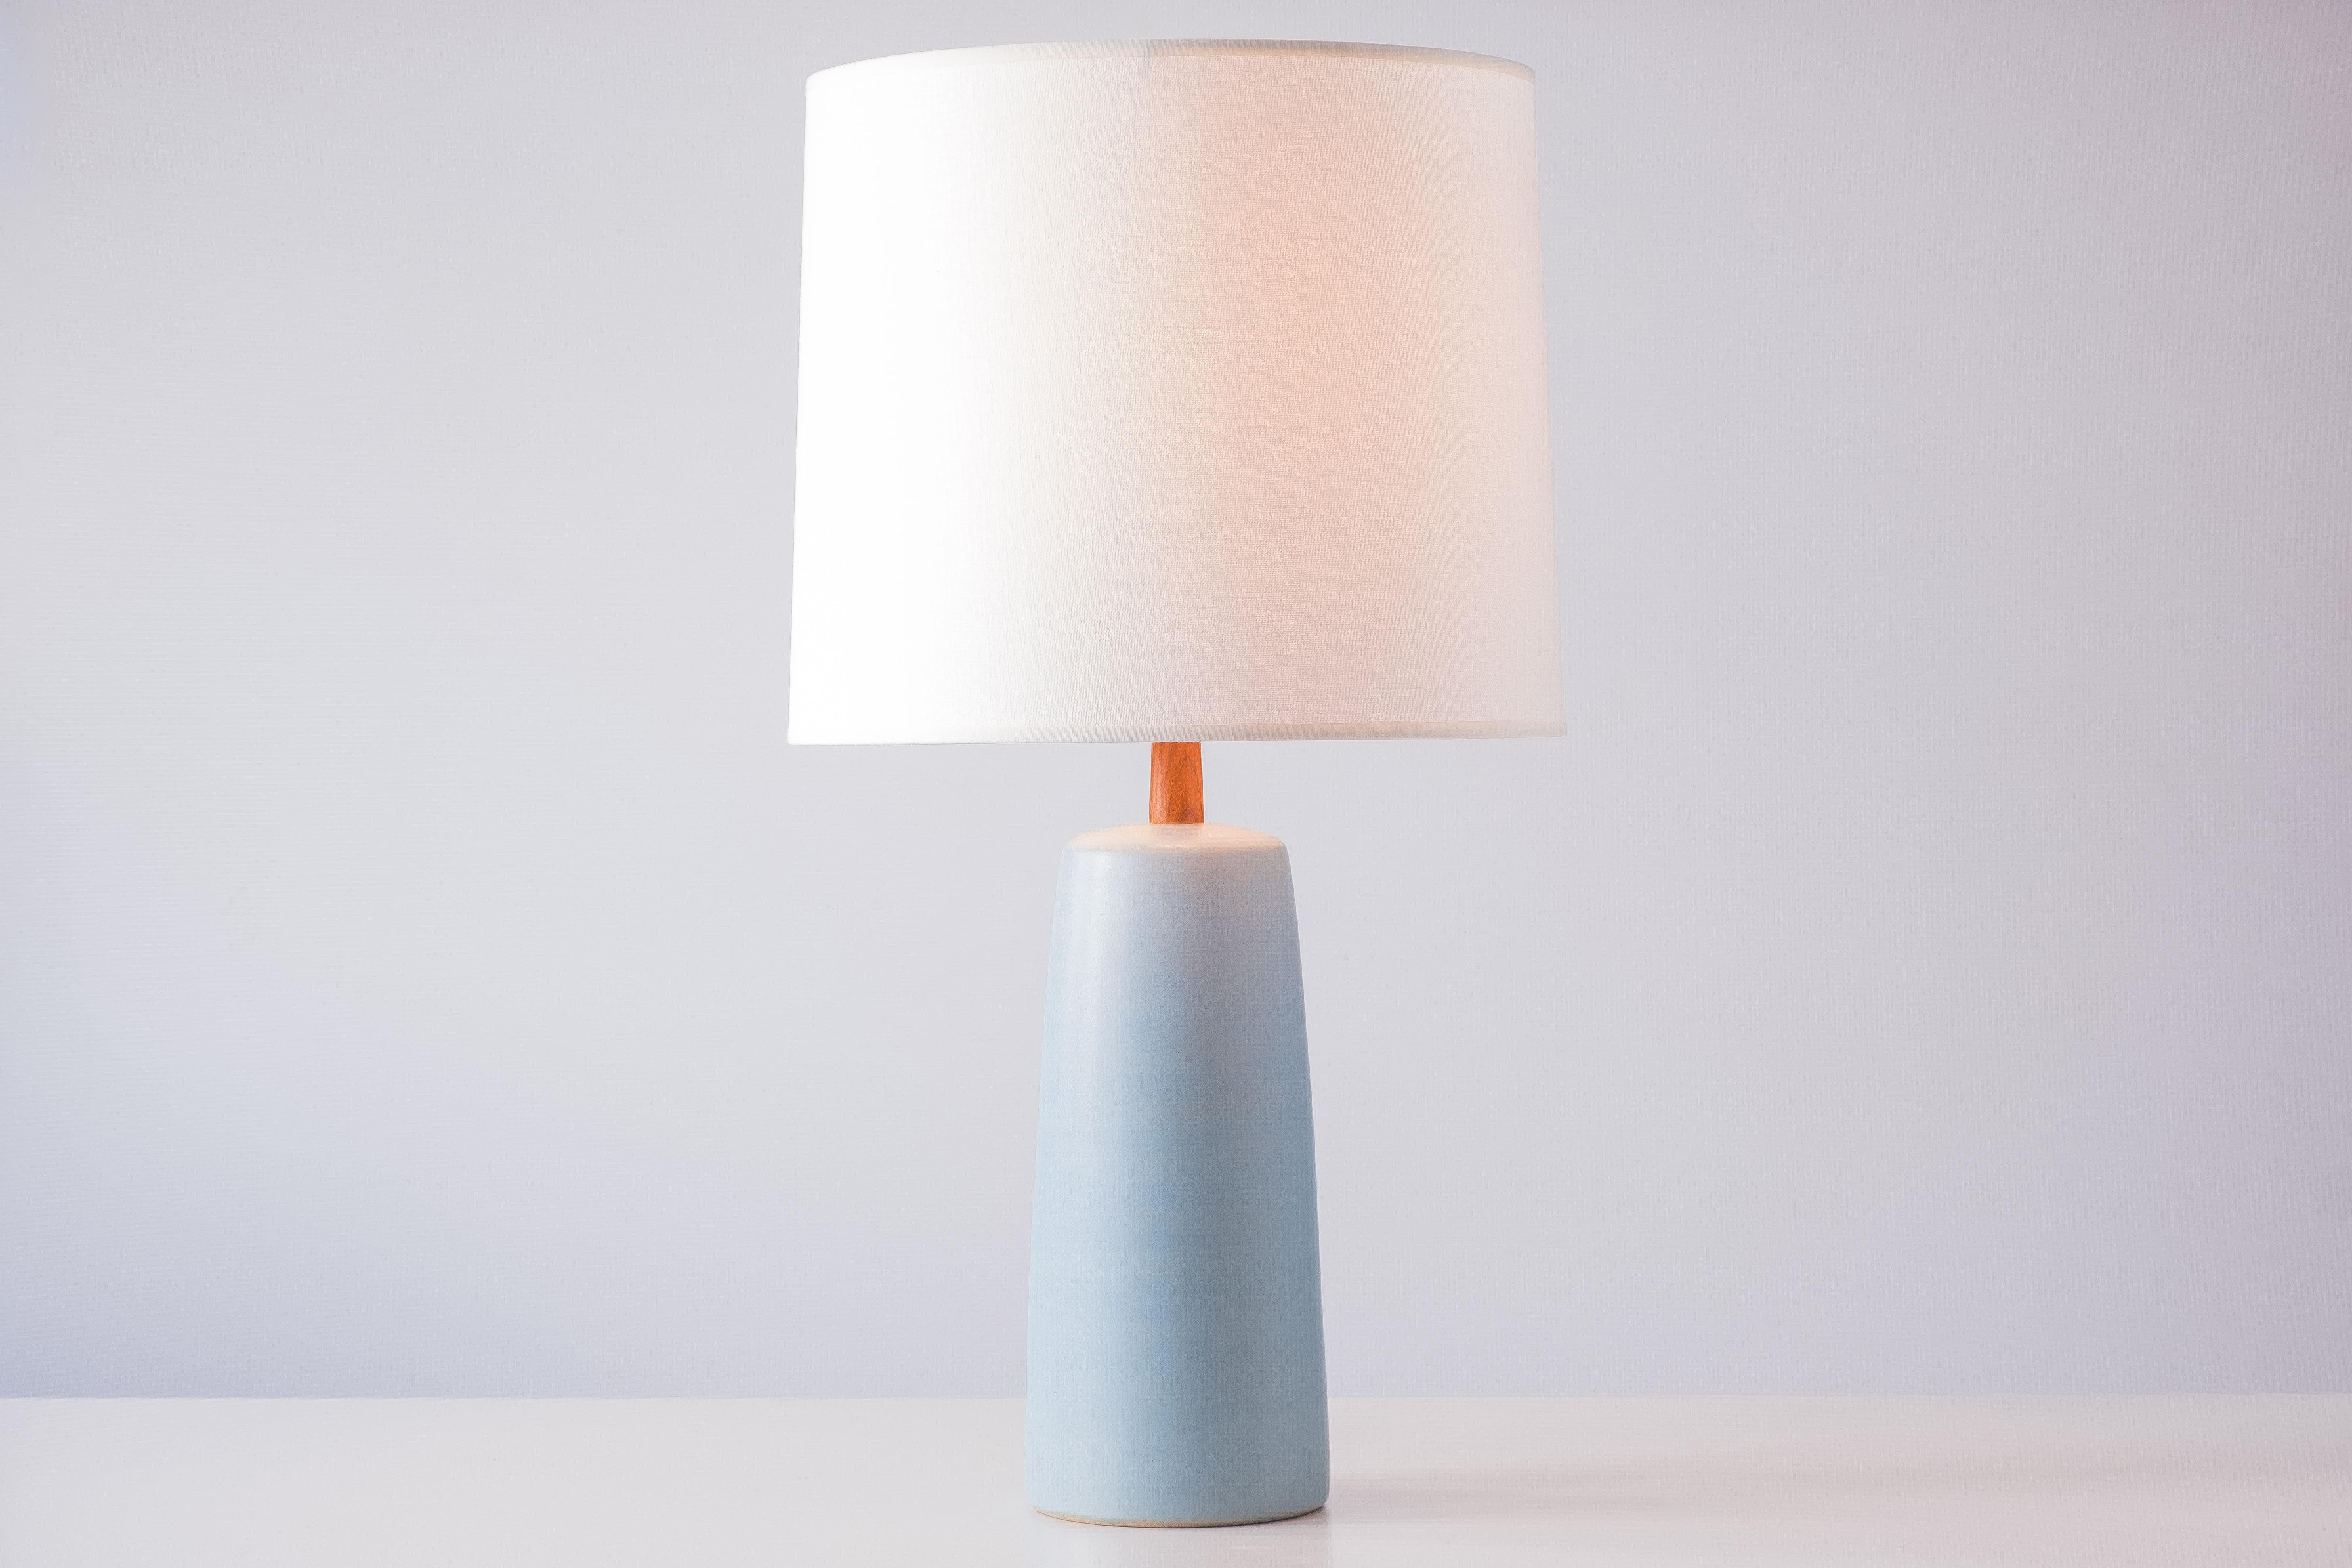 What is it?
—
Another gem from the masters of mid century lightning – Gordon and Jane Martz. Not too big, not too small – this ceramic lamp is equally at home on an end table or credenza as it is on a dresser or bedside table. 

This signed Martz